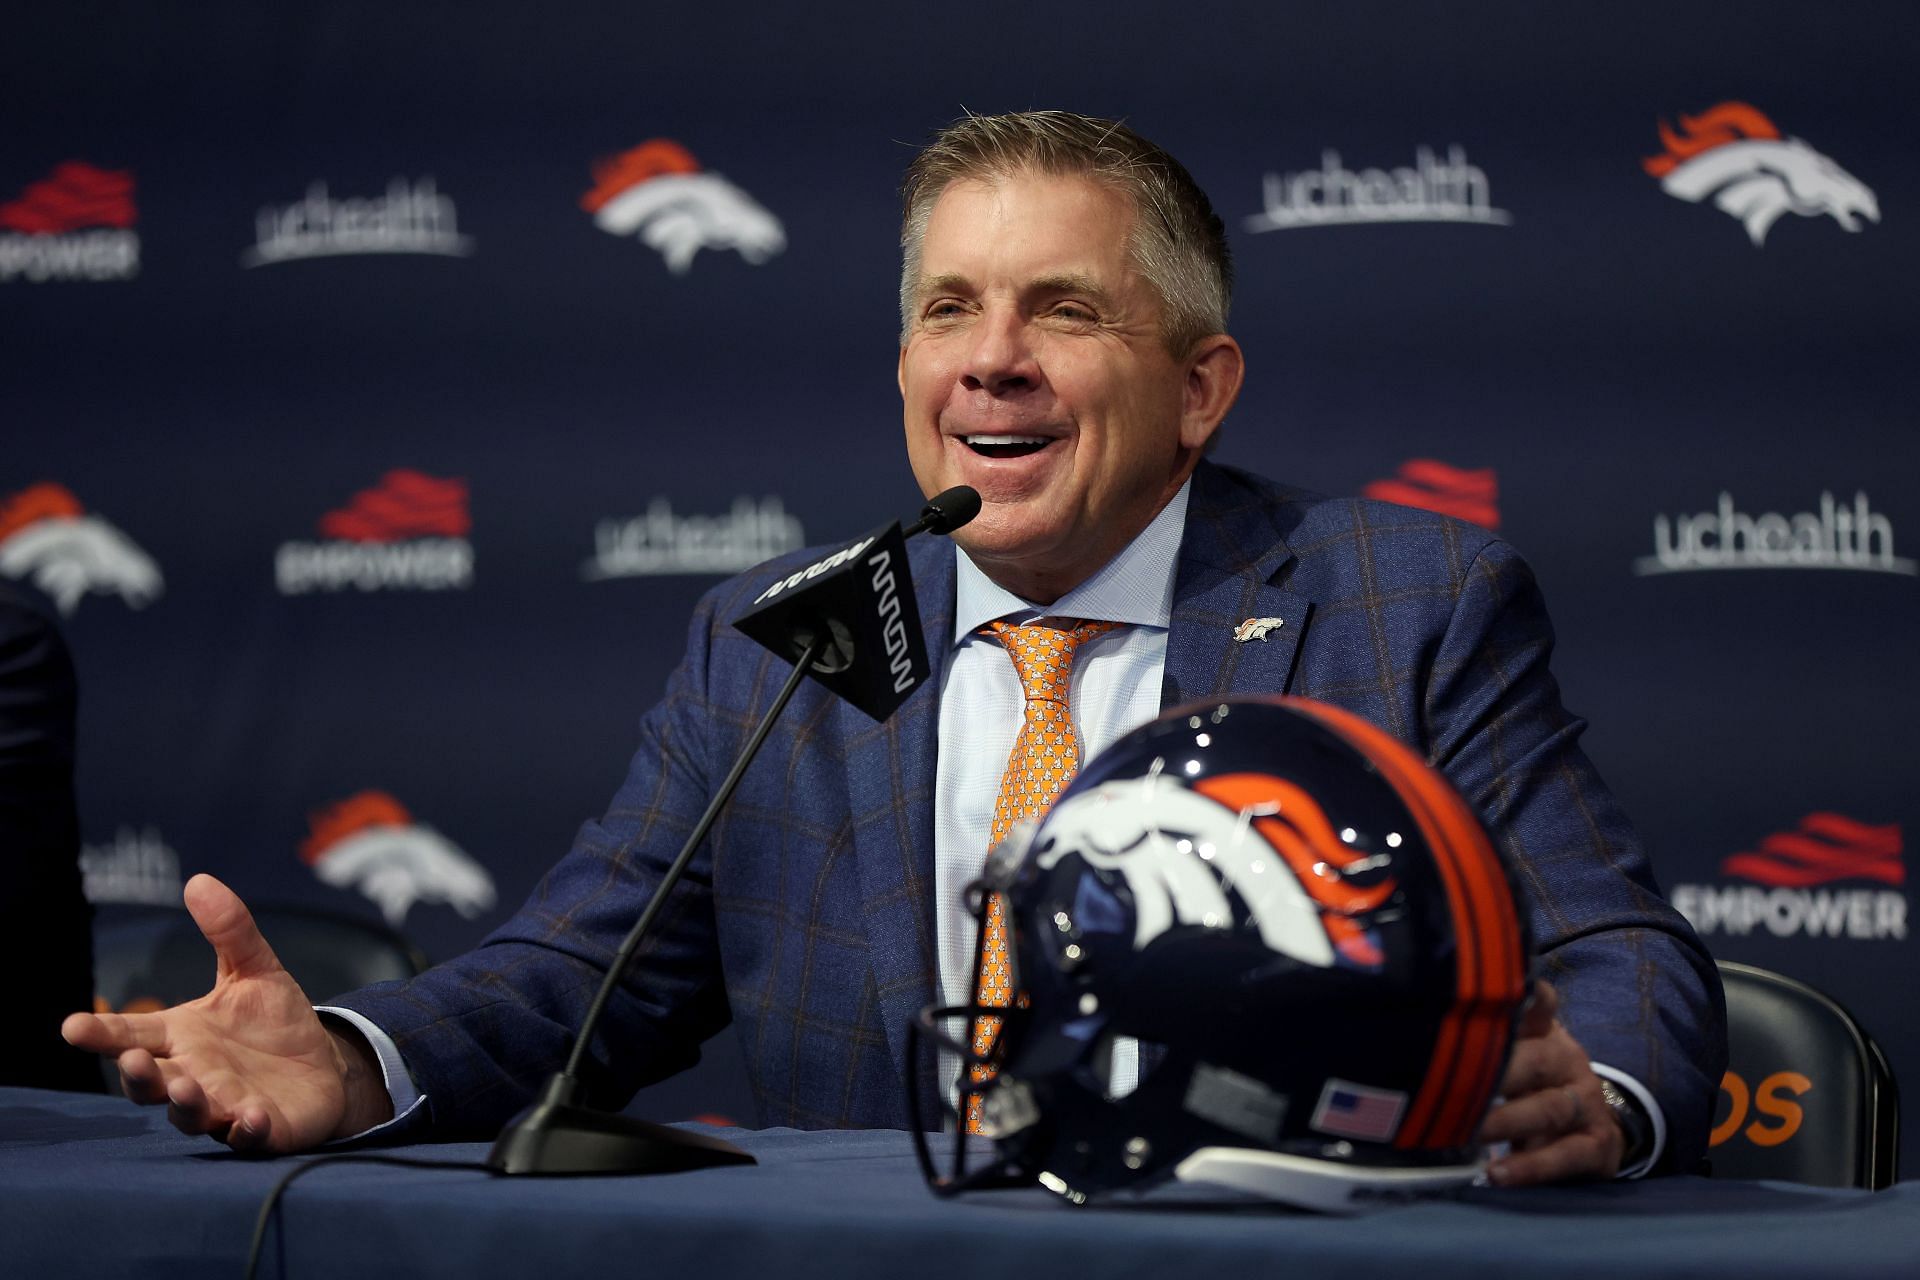 The Denver Broncos are hoping that Sean Payton will help pull the team from the gutter